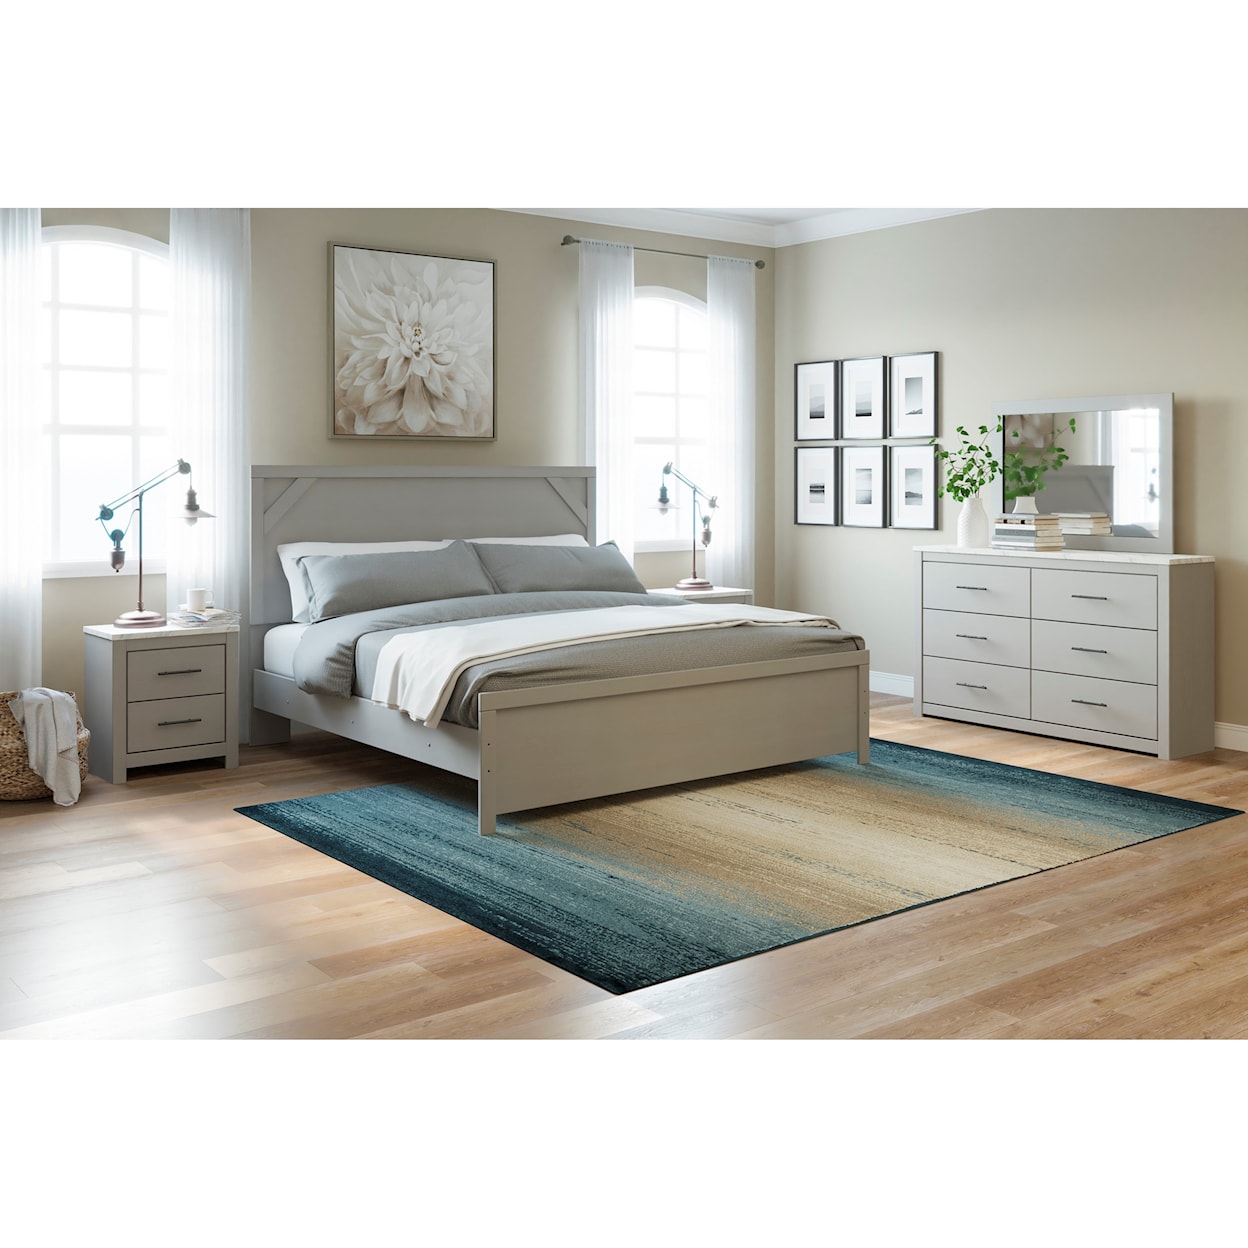 Signature Design by Ashley Cottonburg King Bedroom Group